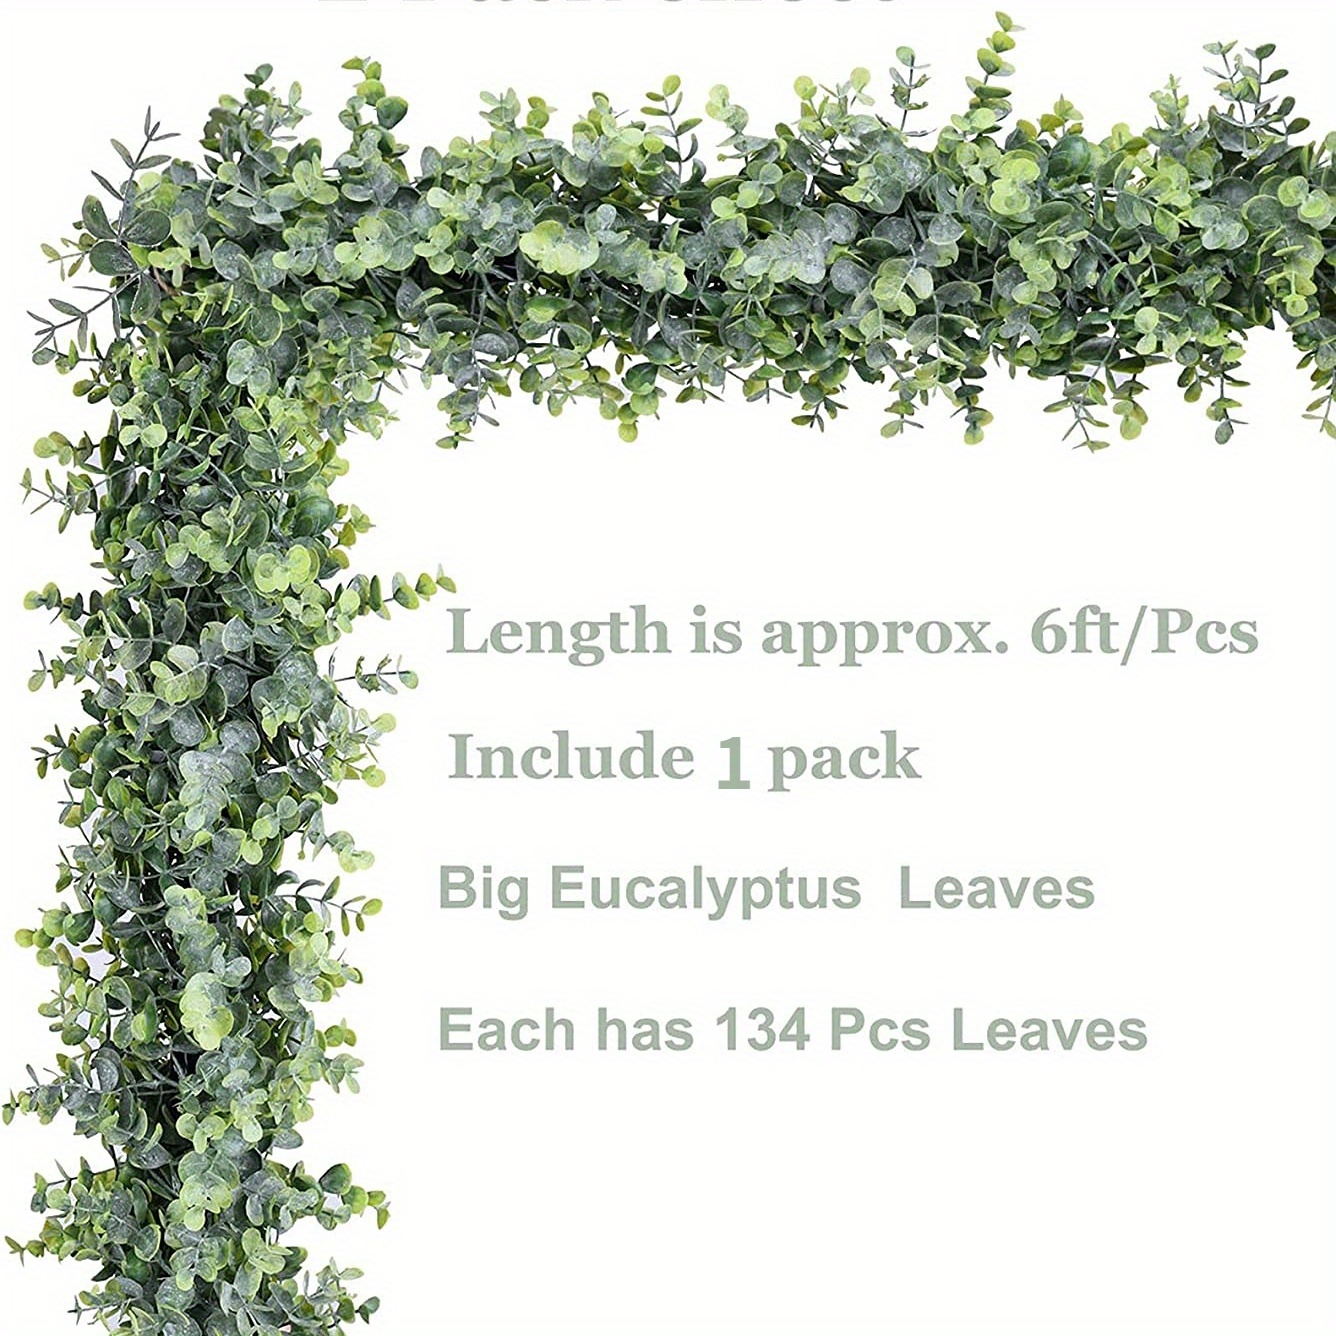 

1pc, Eucalyptus Garland Plant Artificial Vines Hanging Eucalyptus Leaves Greenery Garland For Wedding Backdrop Arch Wall Decor, 6 Feet Uv Protected Indoor Outdoor